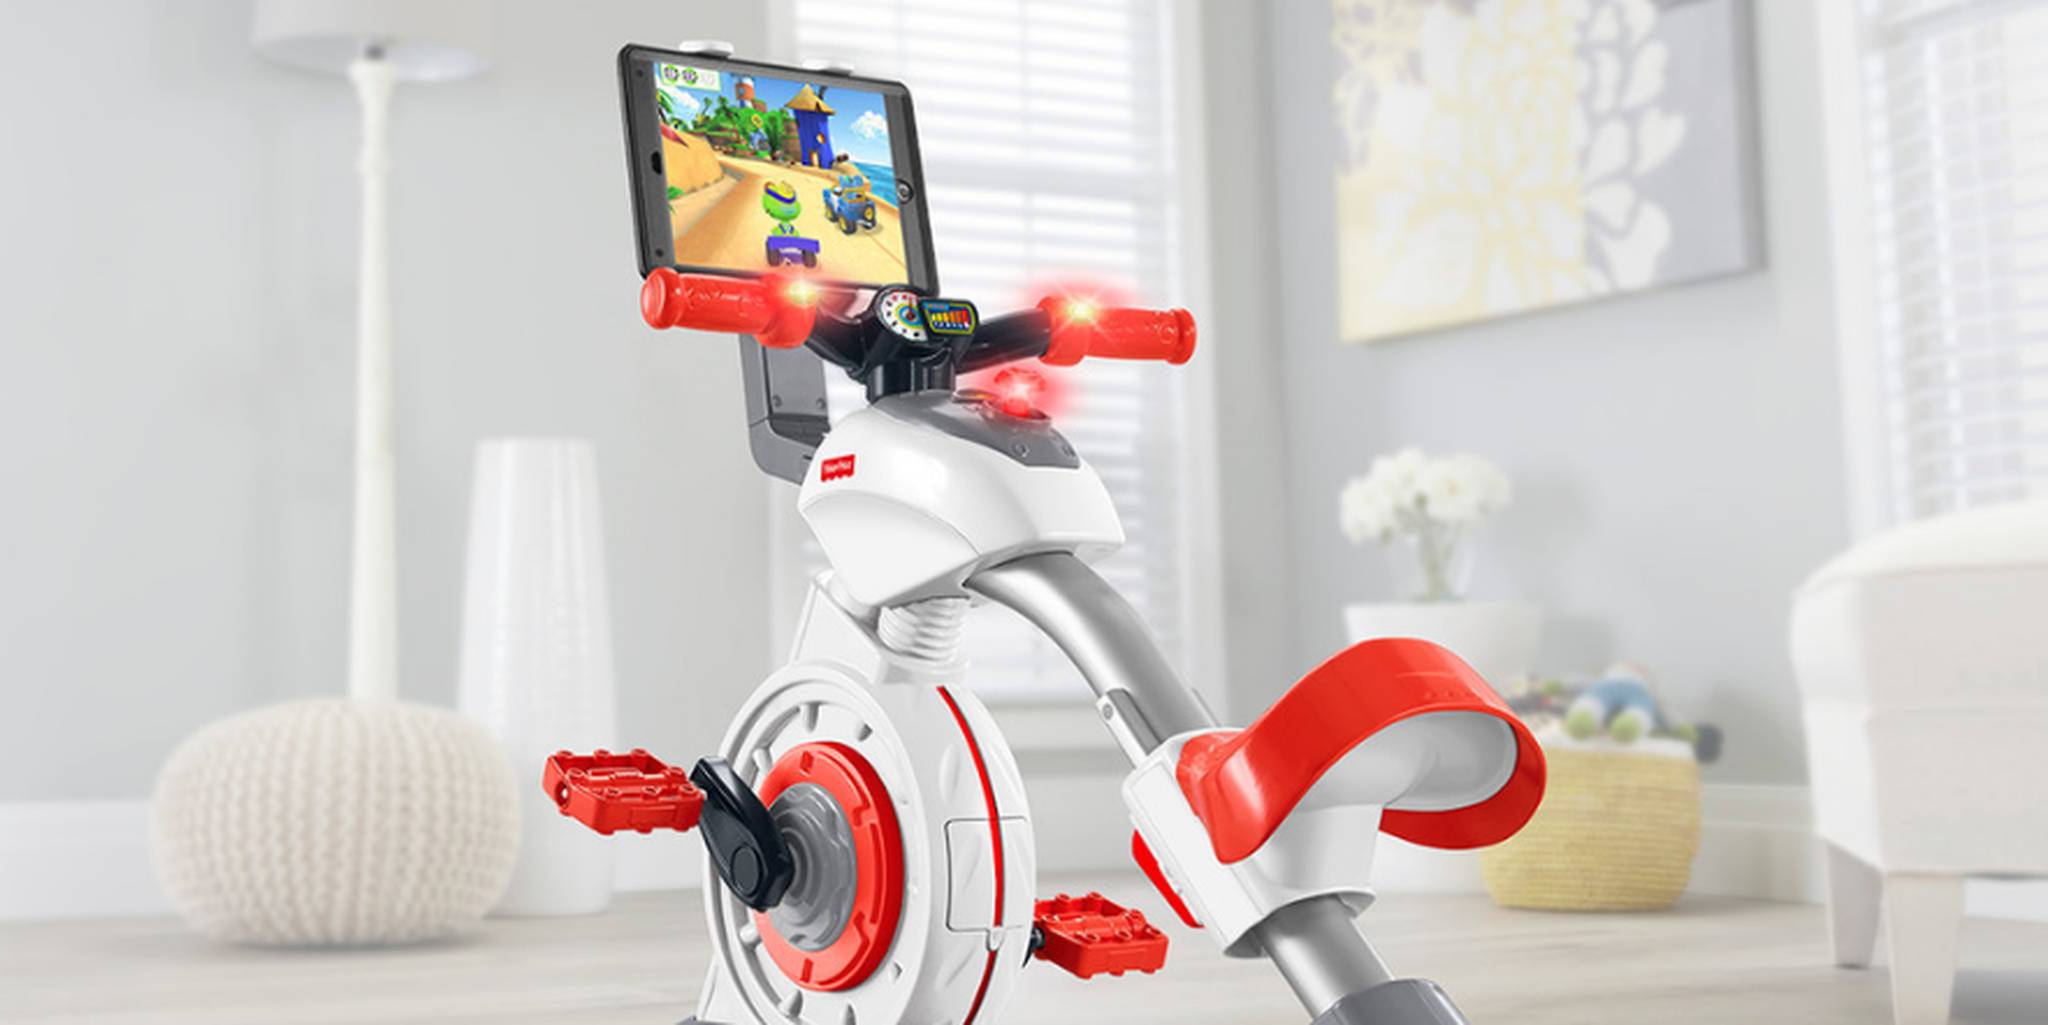 fisher price smart cycle